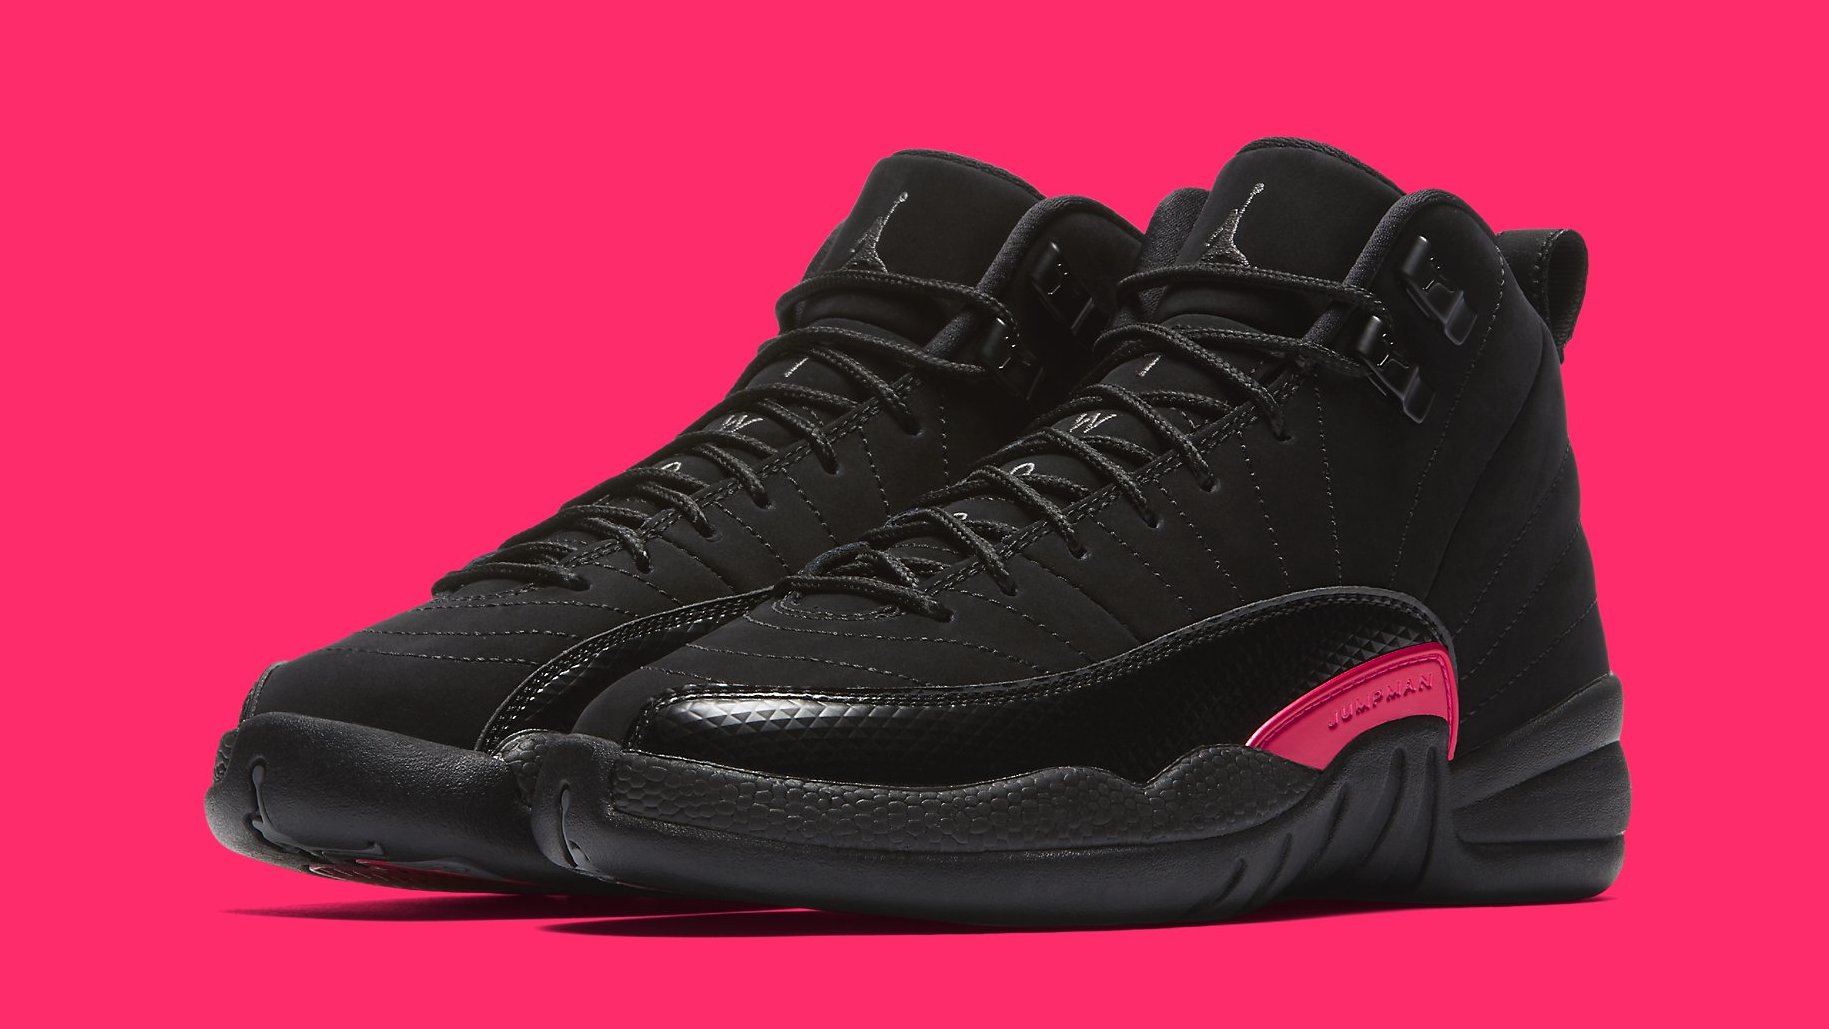 New Black and Pink Air Jordan 12s Dropping Next Week | Complex